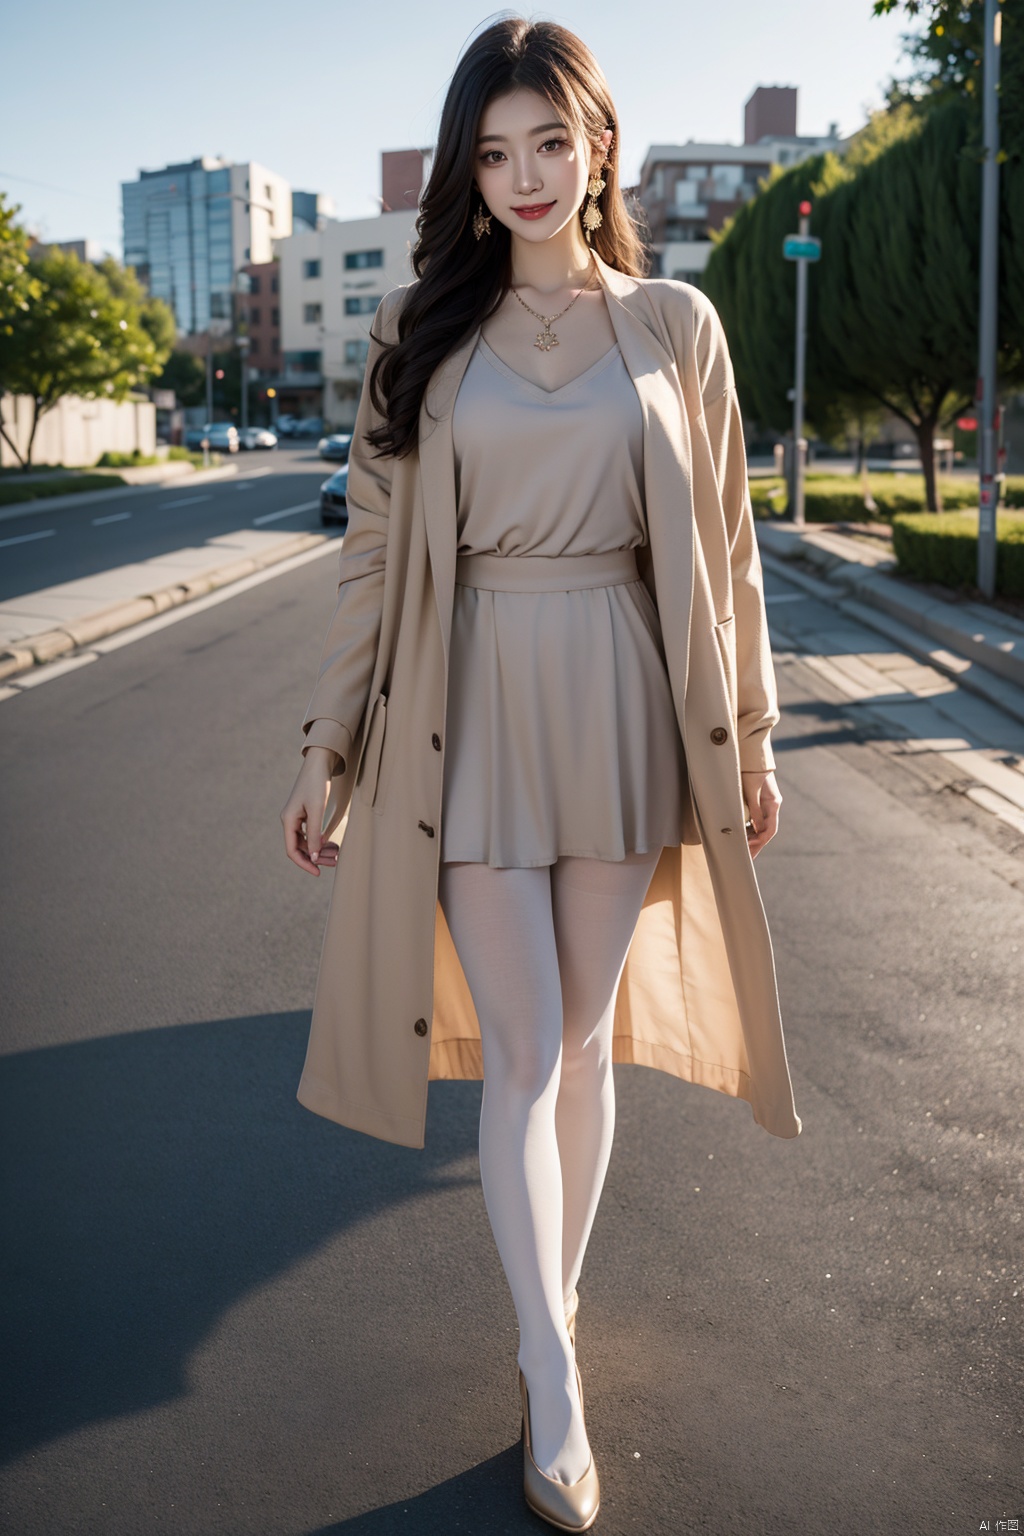 Eastern female, young girl, girlish feeling, sweet smile on the face, slim figure, full chest, big chest, long legs, fleshy body, no pencil legs, five toes, five fingers, two legs, two hands, pantyhose, pantyhose feet, wearing high heels, beige long trench coat, high beauty, small fragrance, holding a baby, baby fat, earrings, Necklace, soft light, road background, short skirt suit, movie texture, 16K, HD picture quality, real girl, full of details, super details, long hair, updo, confident woman, full of charm, sexy, protruding back, great hips, maternal glory, baby carriage